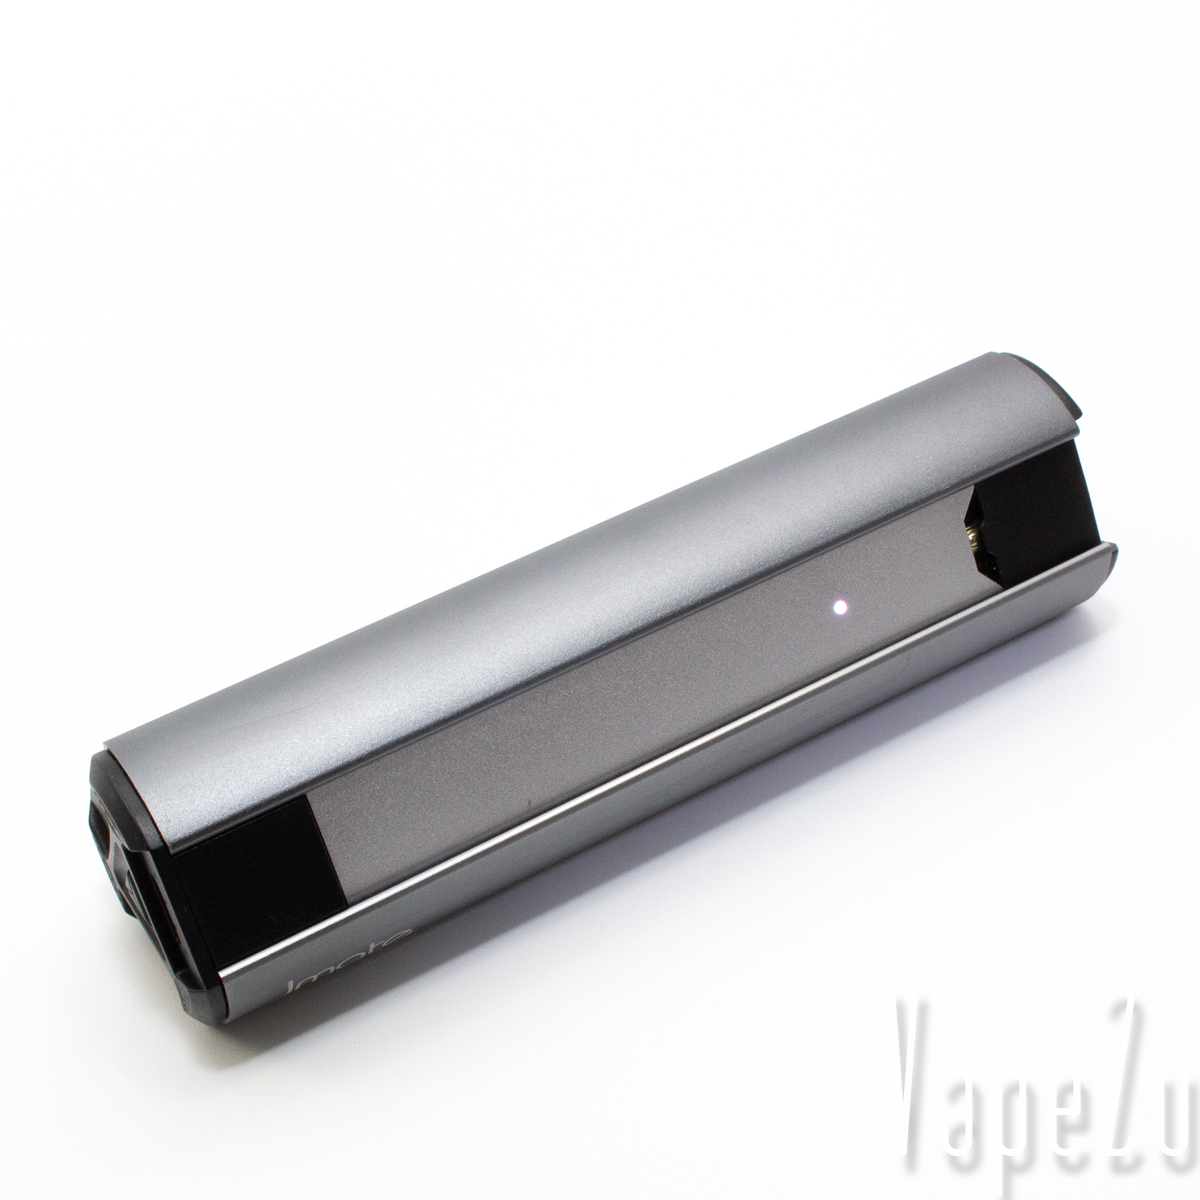 Jmate P2 Portable Charging Case for JUUL JUUL用ポータブル充電 ...